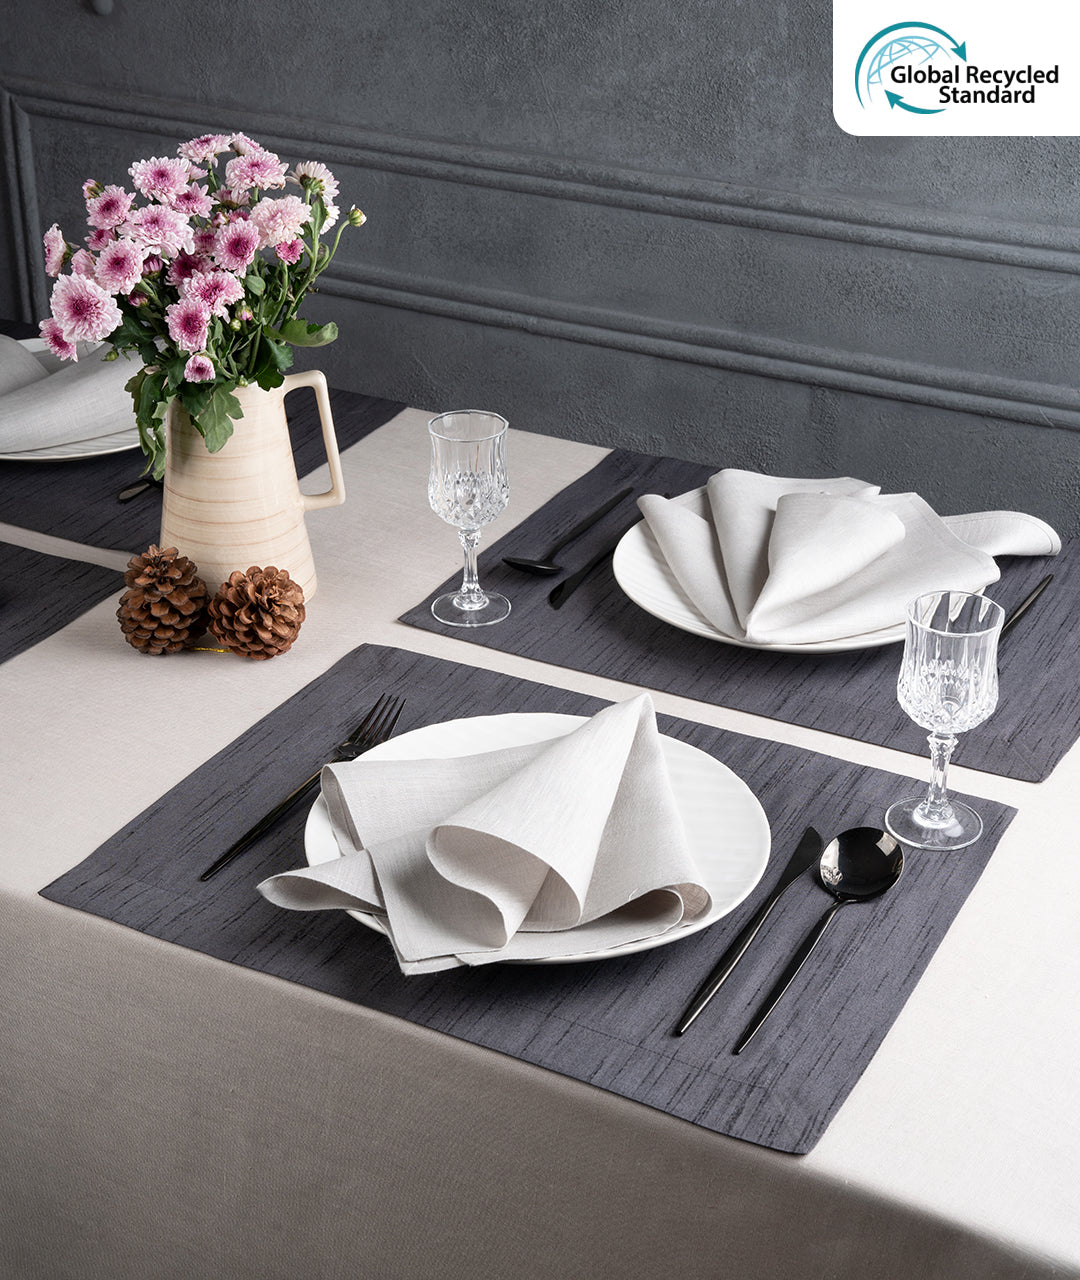 Charcoal Grey Silk Textured Placemats 14 x 19 Inch Set of 4 - Mitered Corner